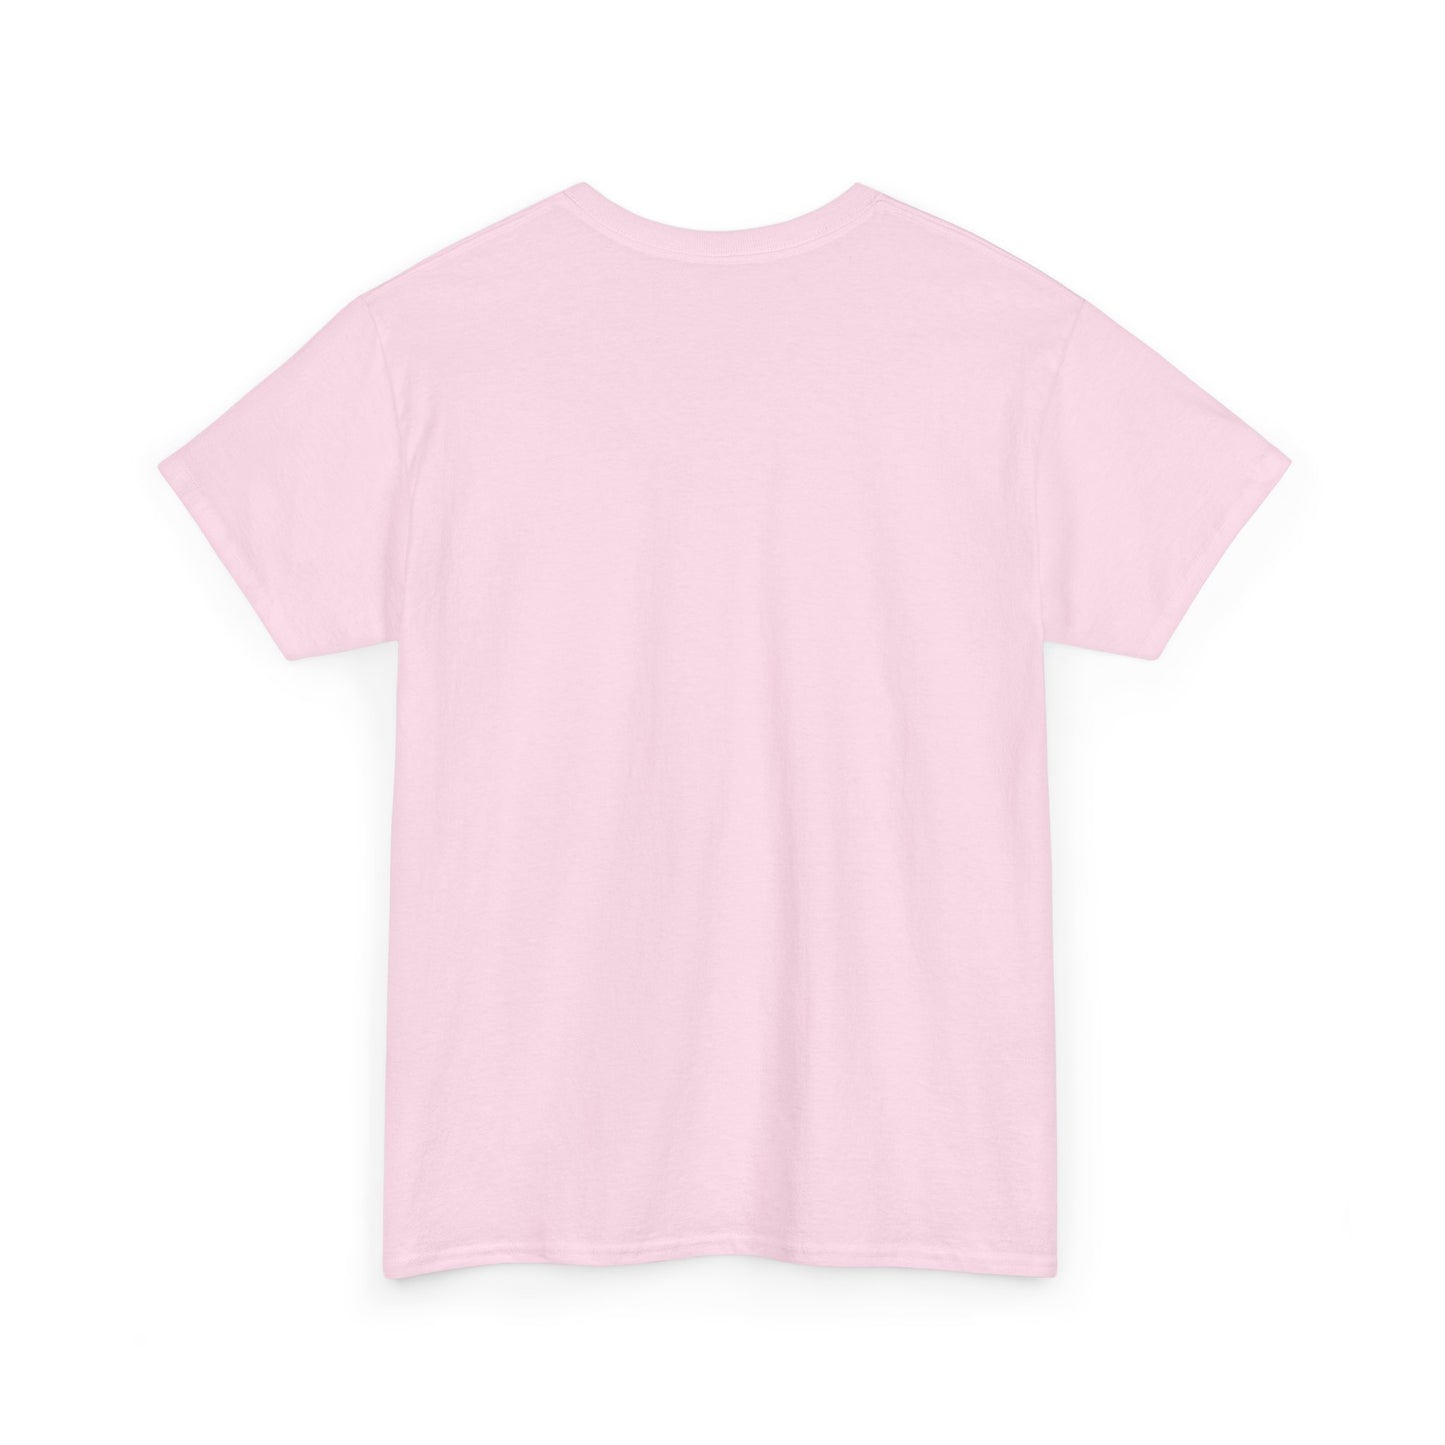 Mother of Pink Tee